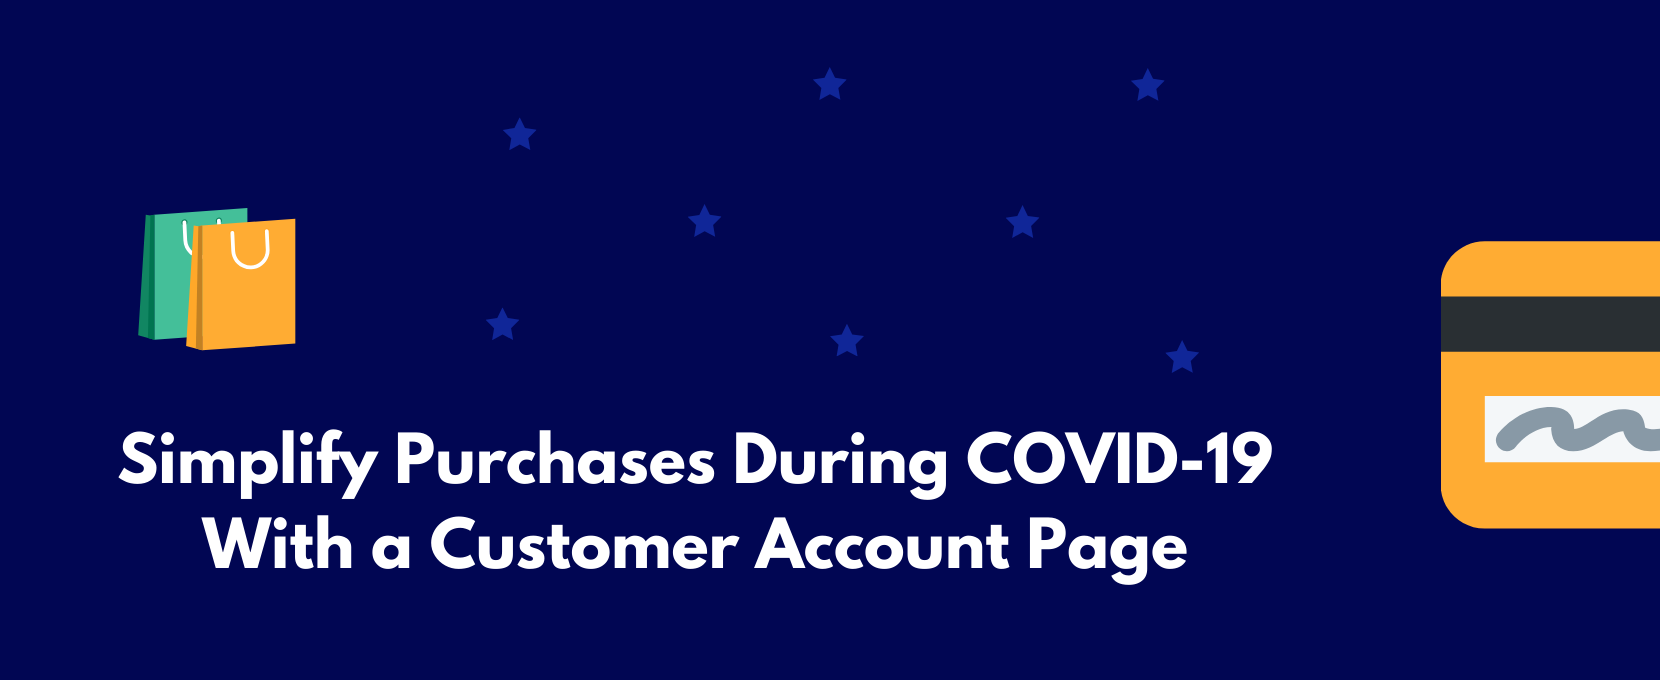 Make it easier for customers to make purchases during COVID-19 with a customer account page